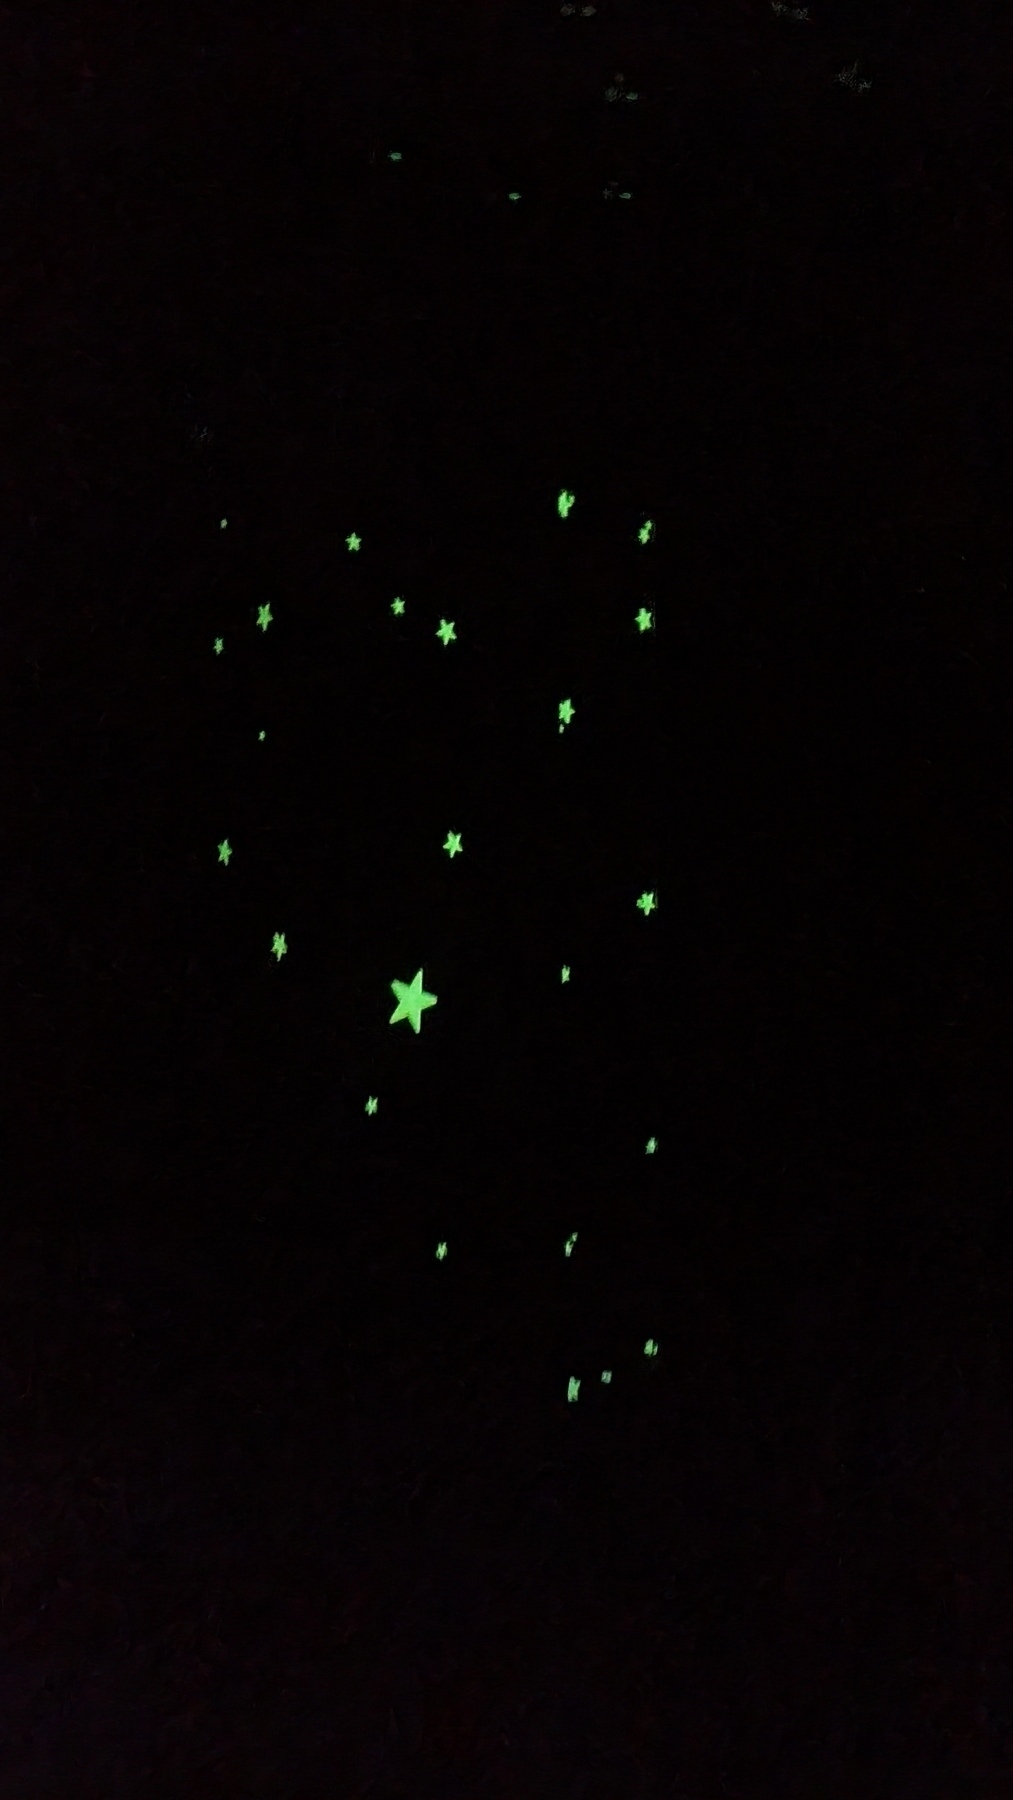 glow in the dark stars of different sizes seen glowing in the dark